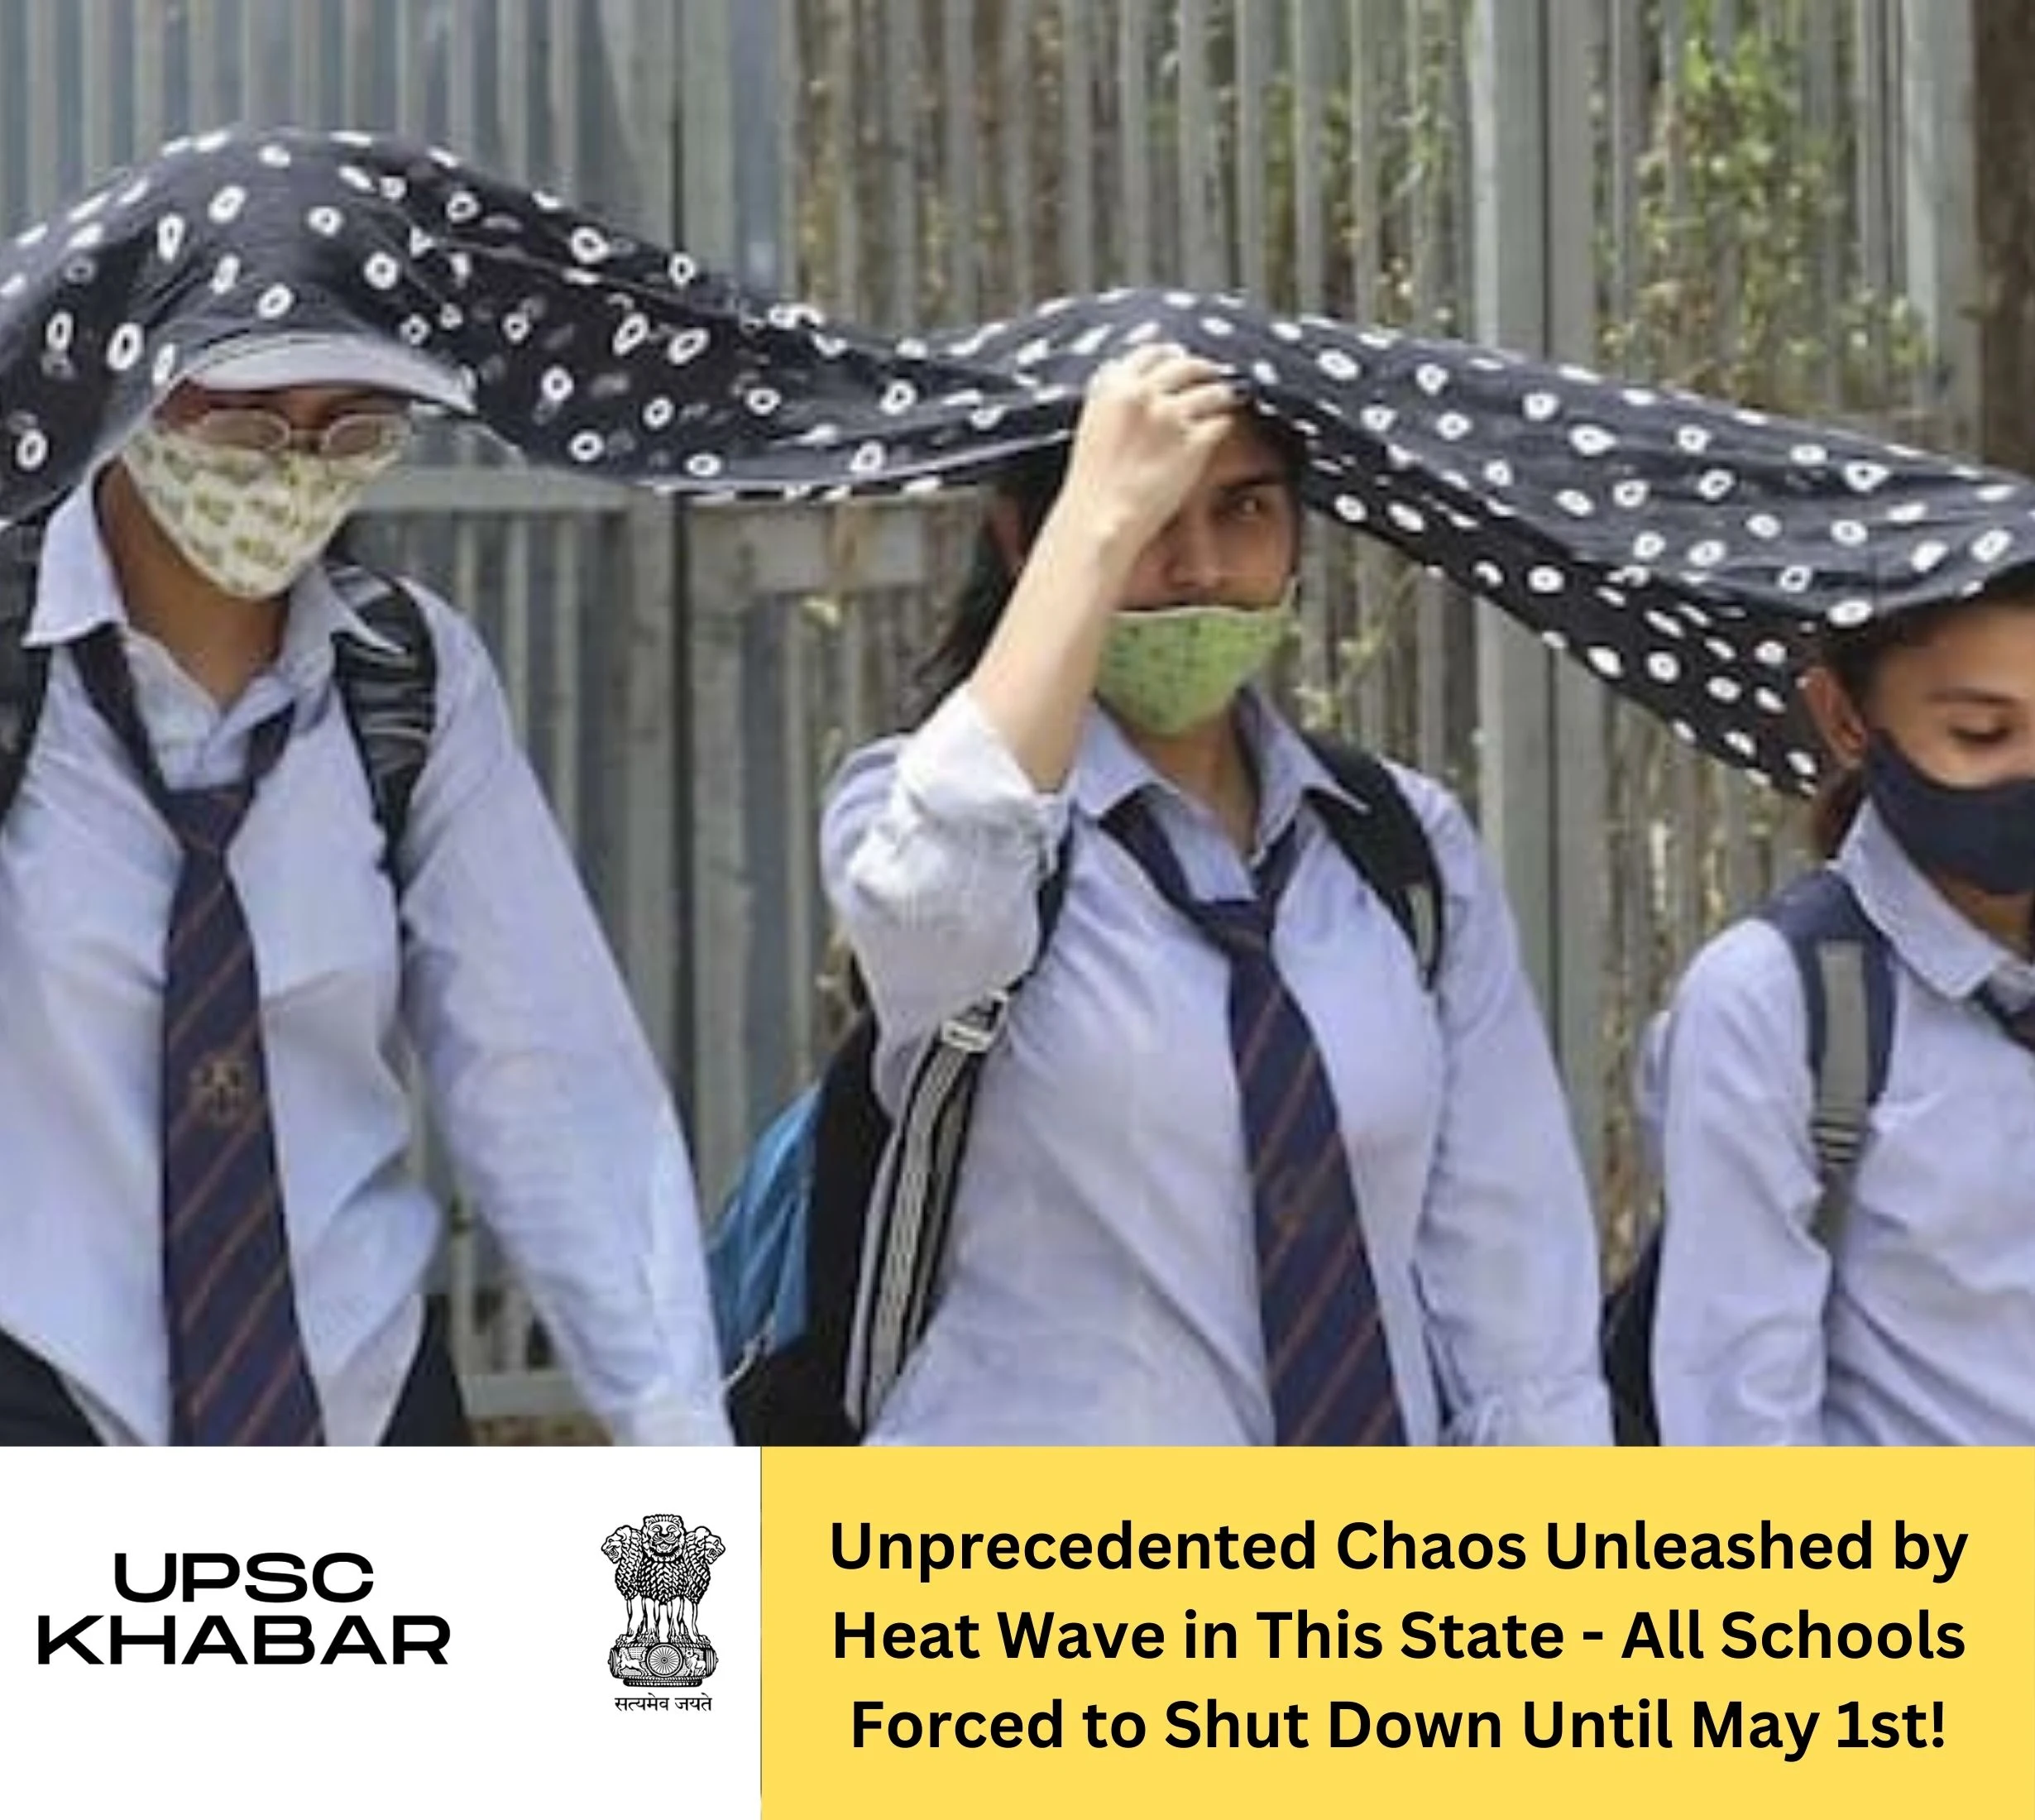 Unprecedented Chaos Unleashed by Heat Wave in This State - All Schools Forced to Shut Down Until May 1st!